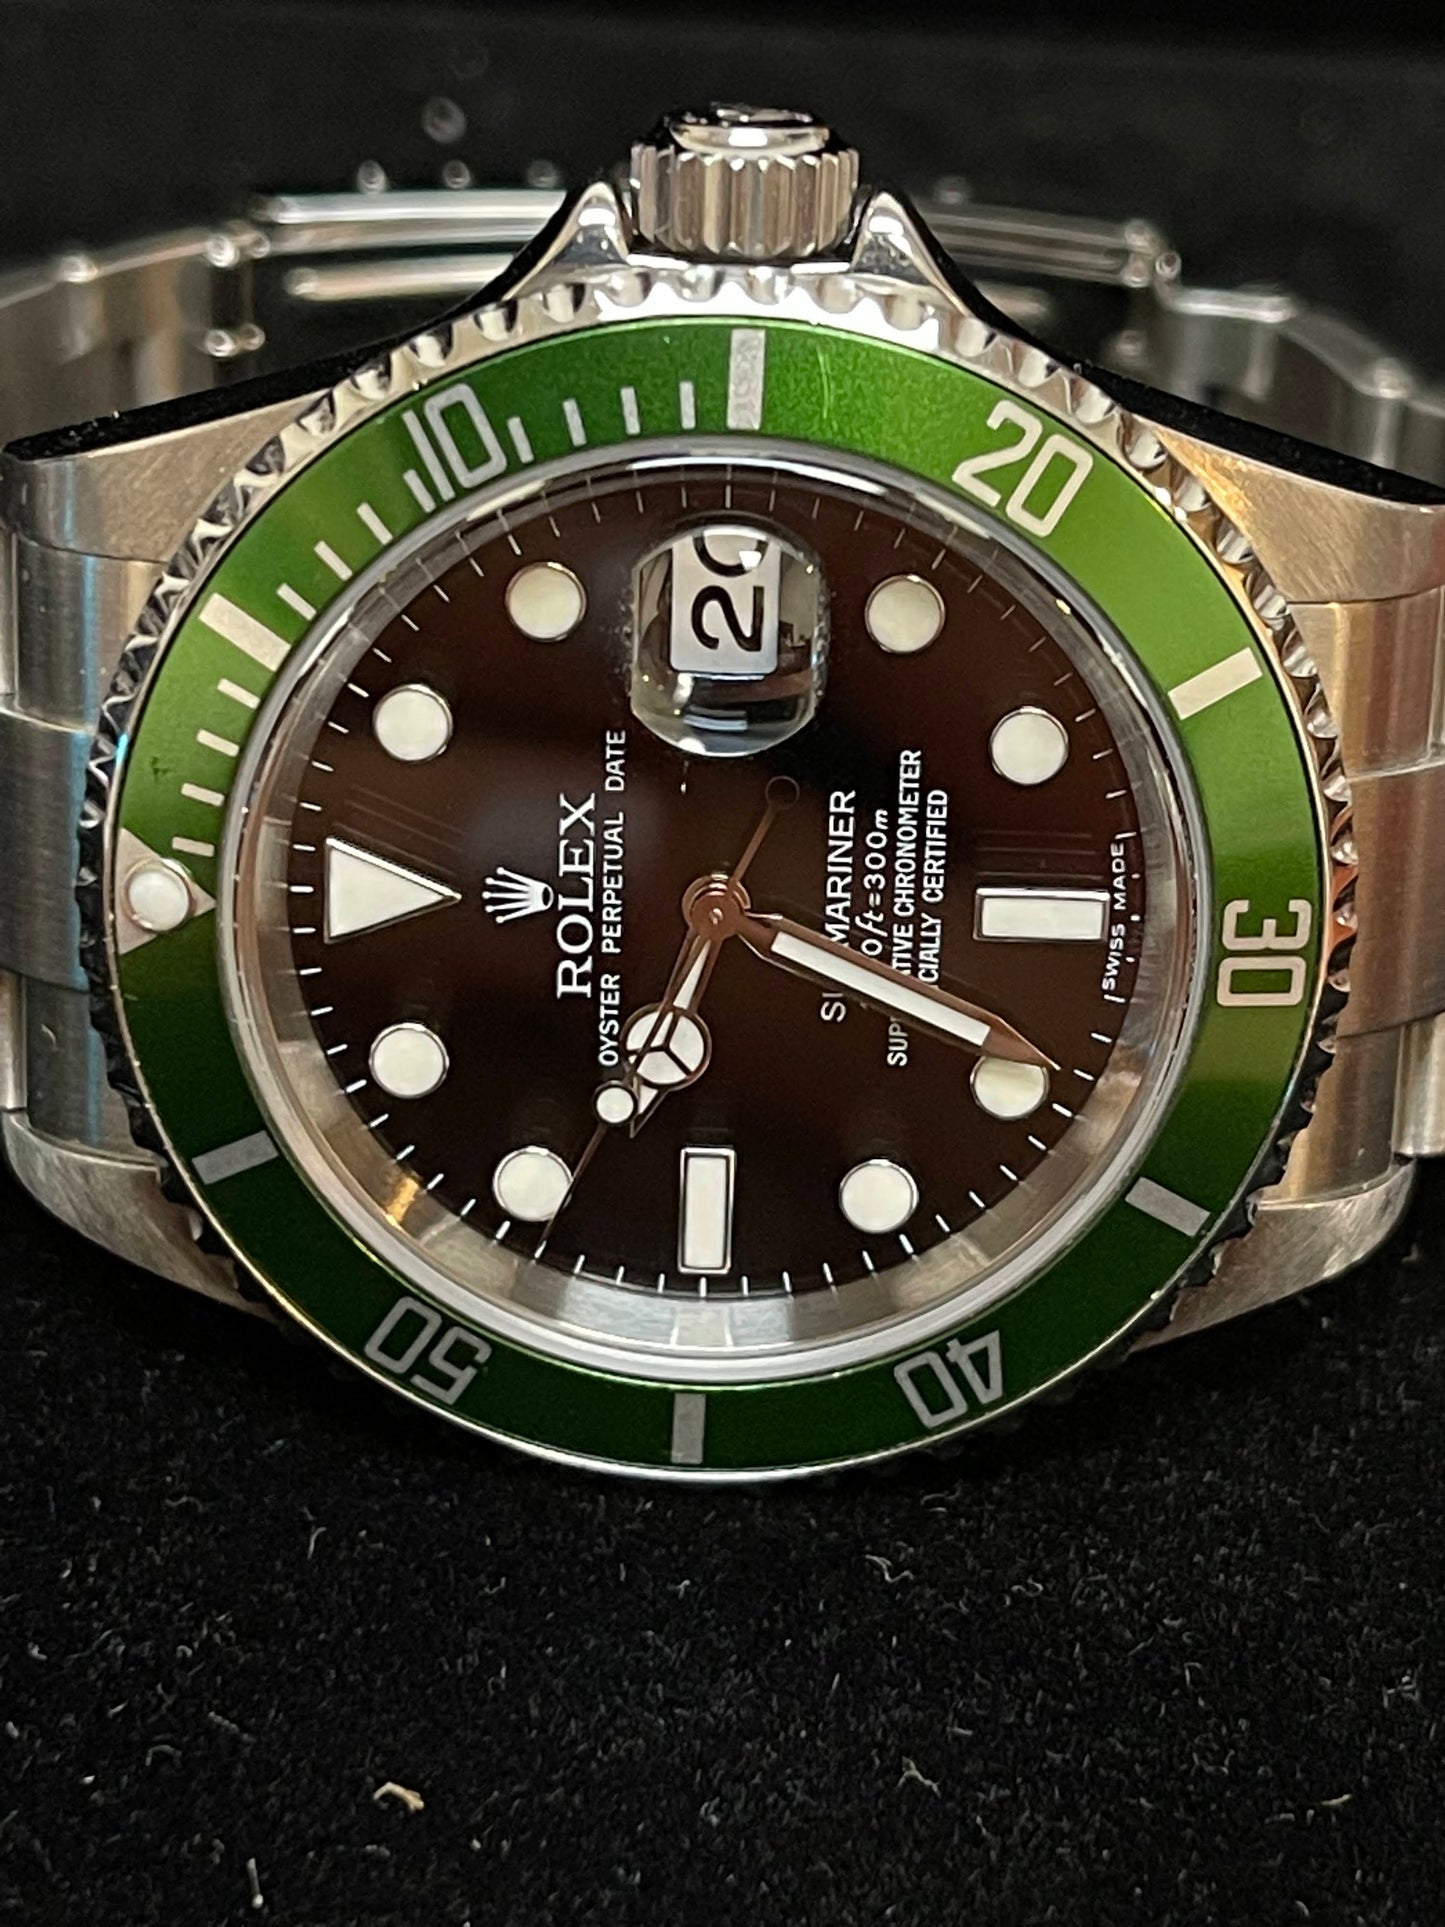 2006 Rolex Submariner Kermit Black Dial Green Bezel 16610LV With Papers 40mm